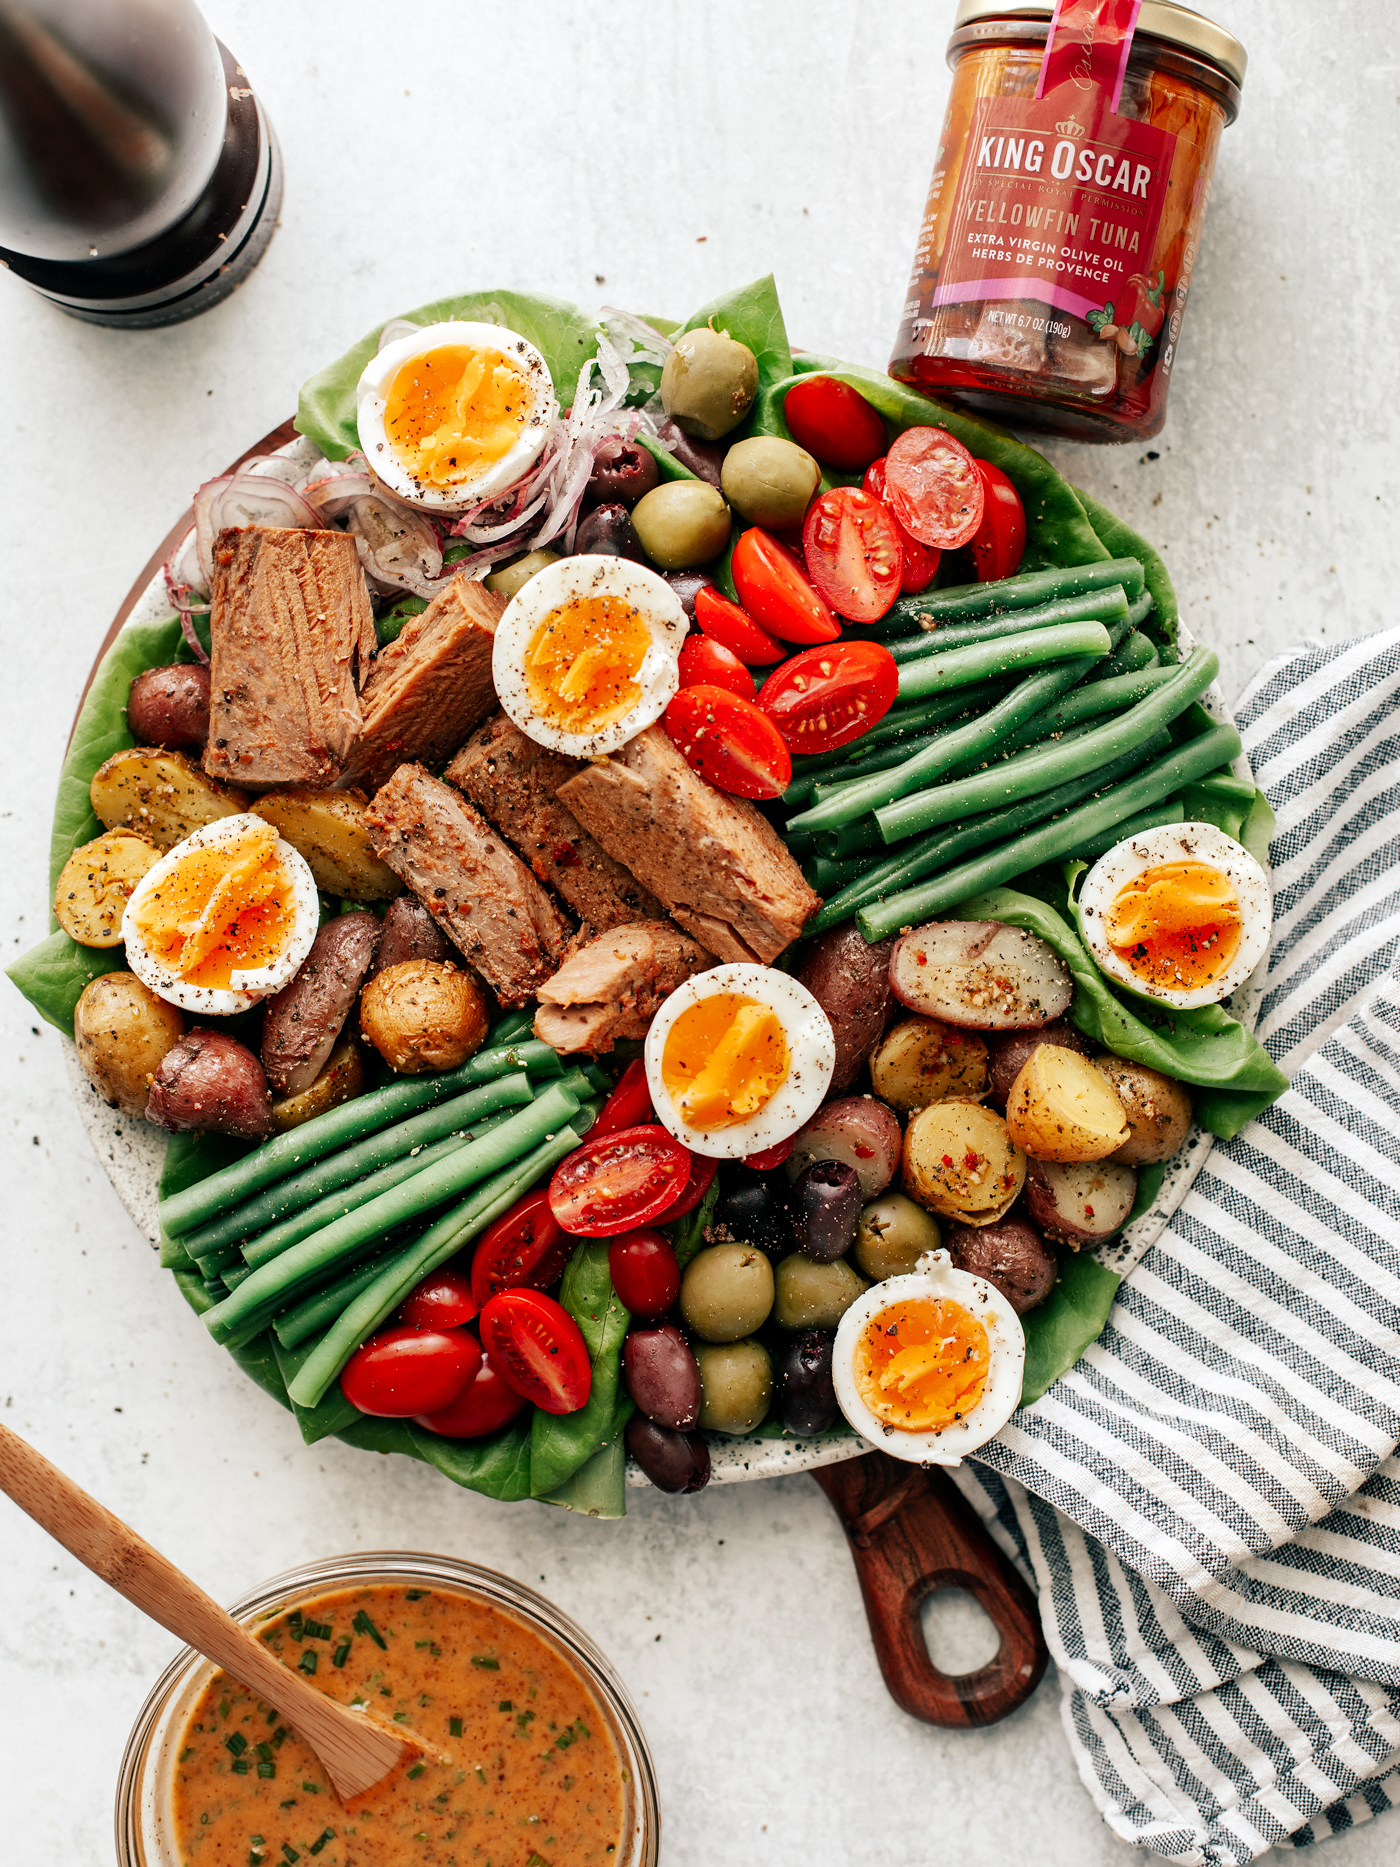 Colorful platter of Niçoise Salad with fresh veggie and soft-boiled eggs. Striped dish towel off to the side with bowl of vinaigrette and jar of tuna.